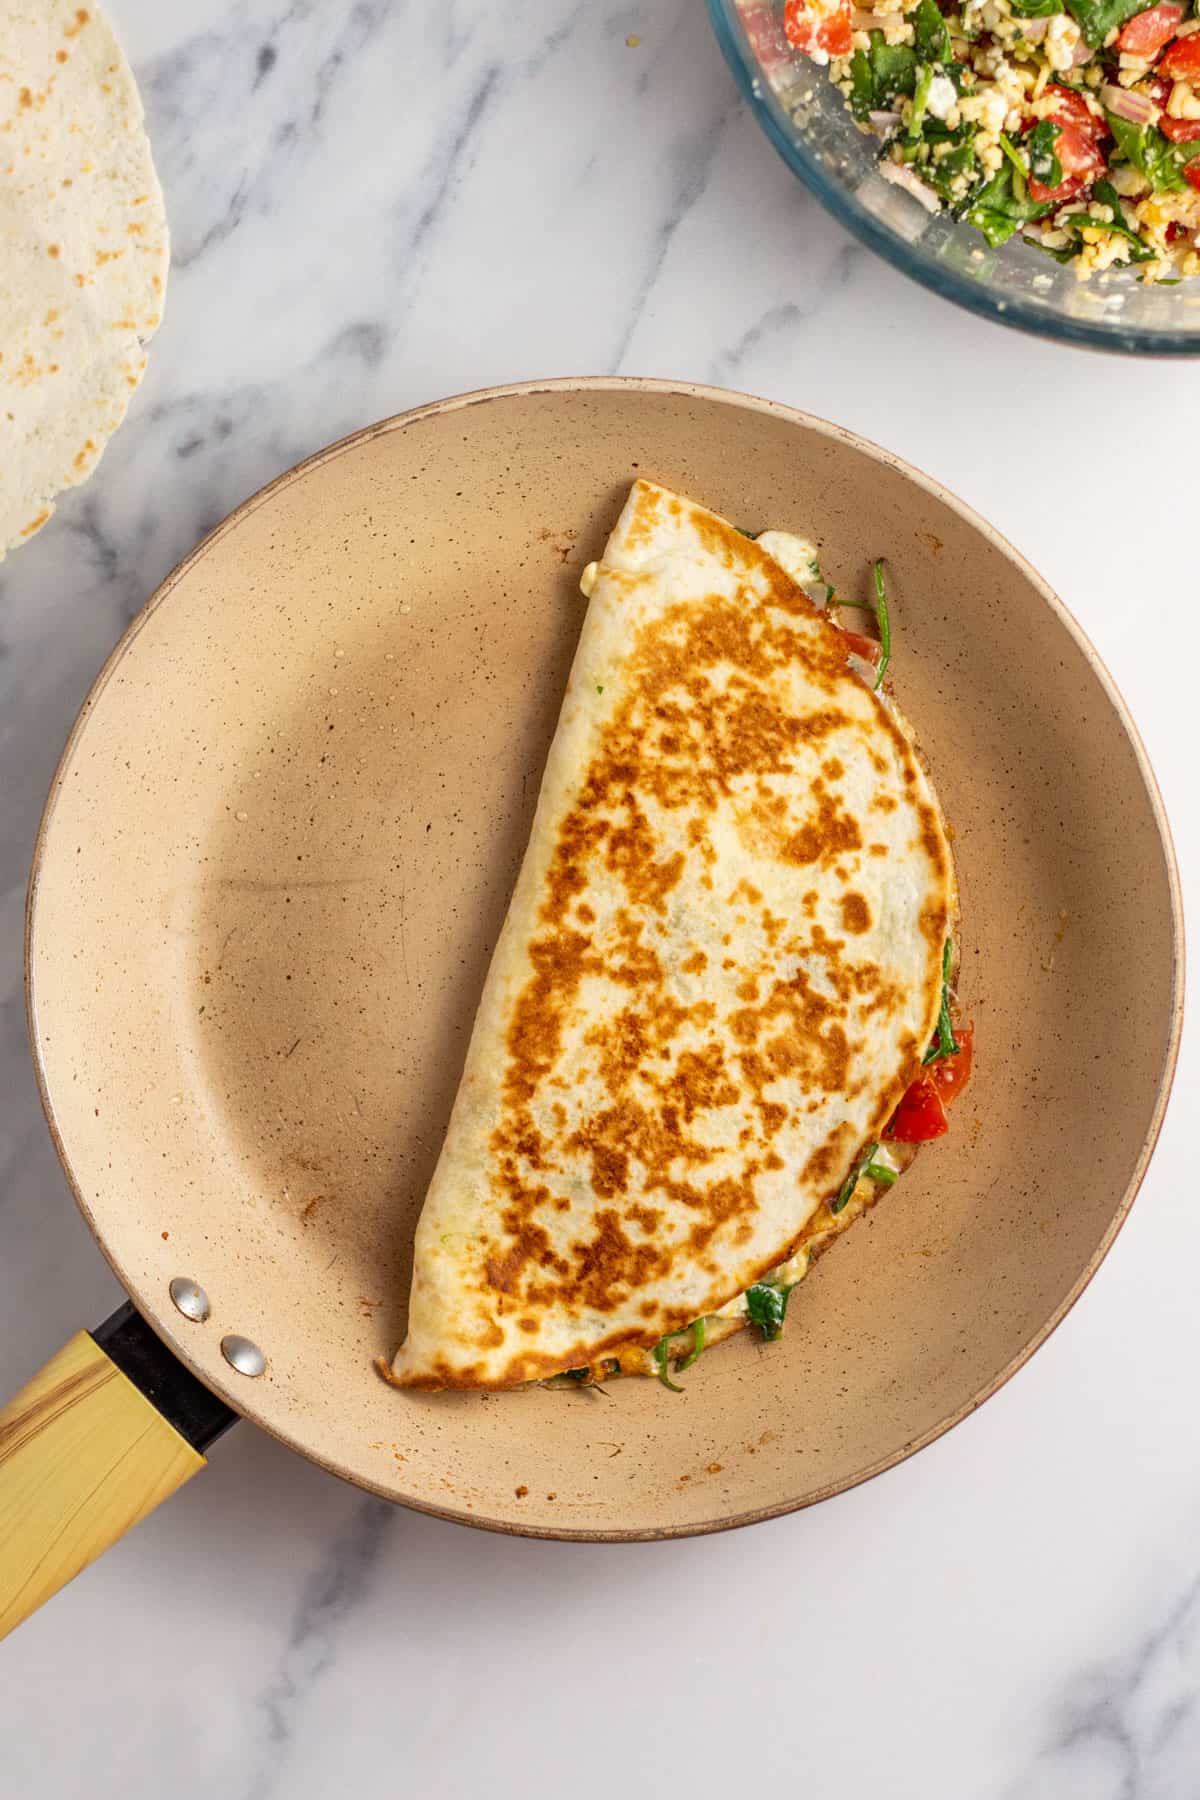 pan fried quesadilla in a frying pan cooked